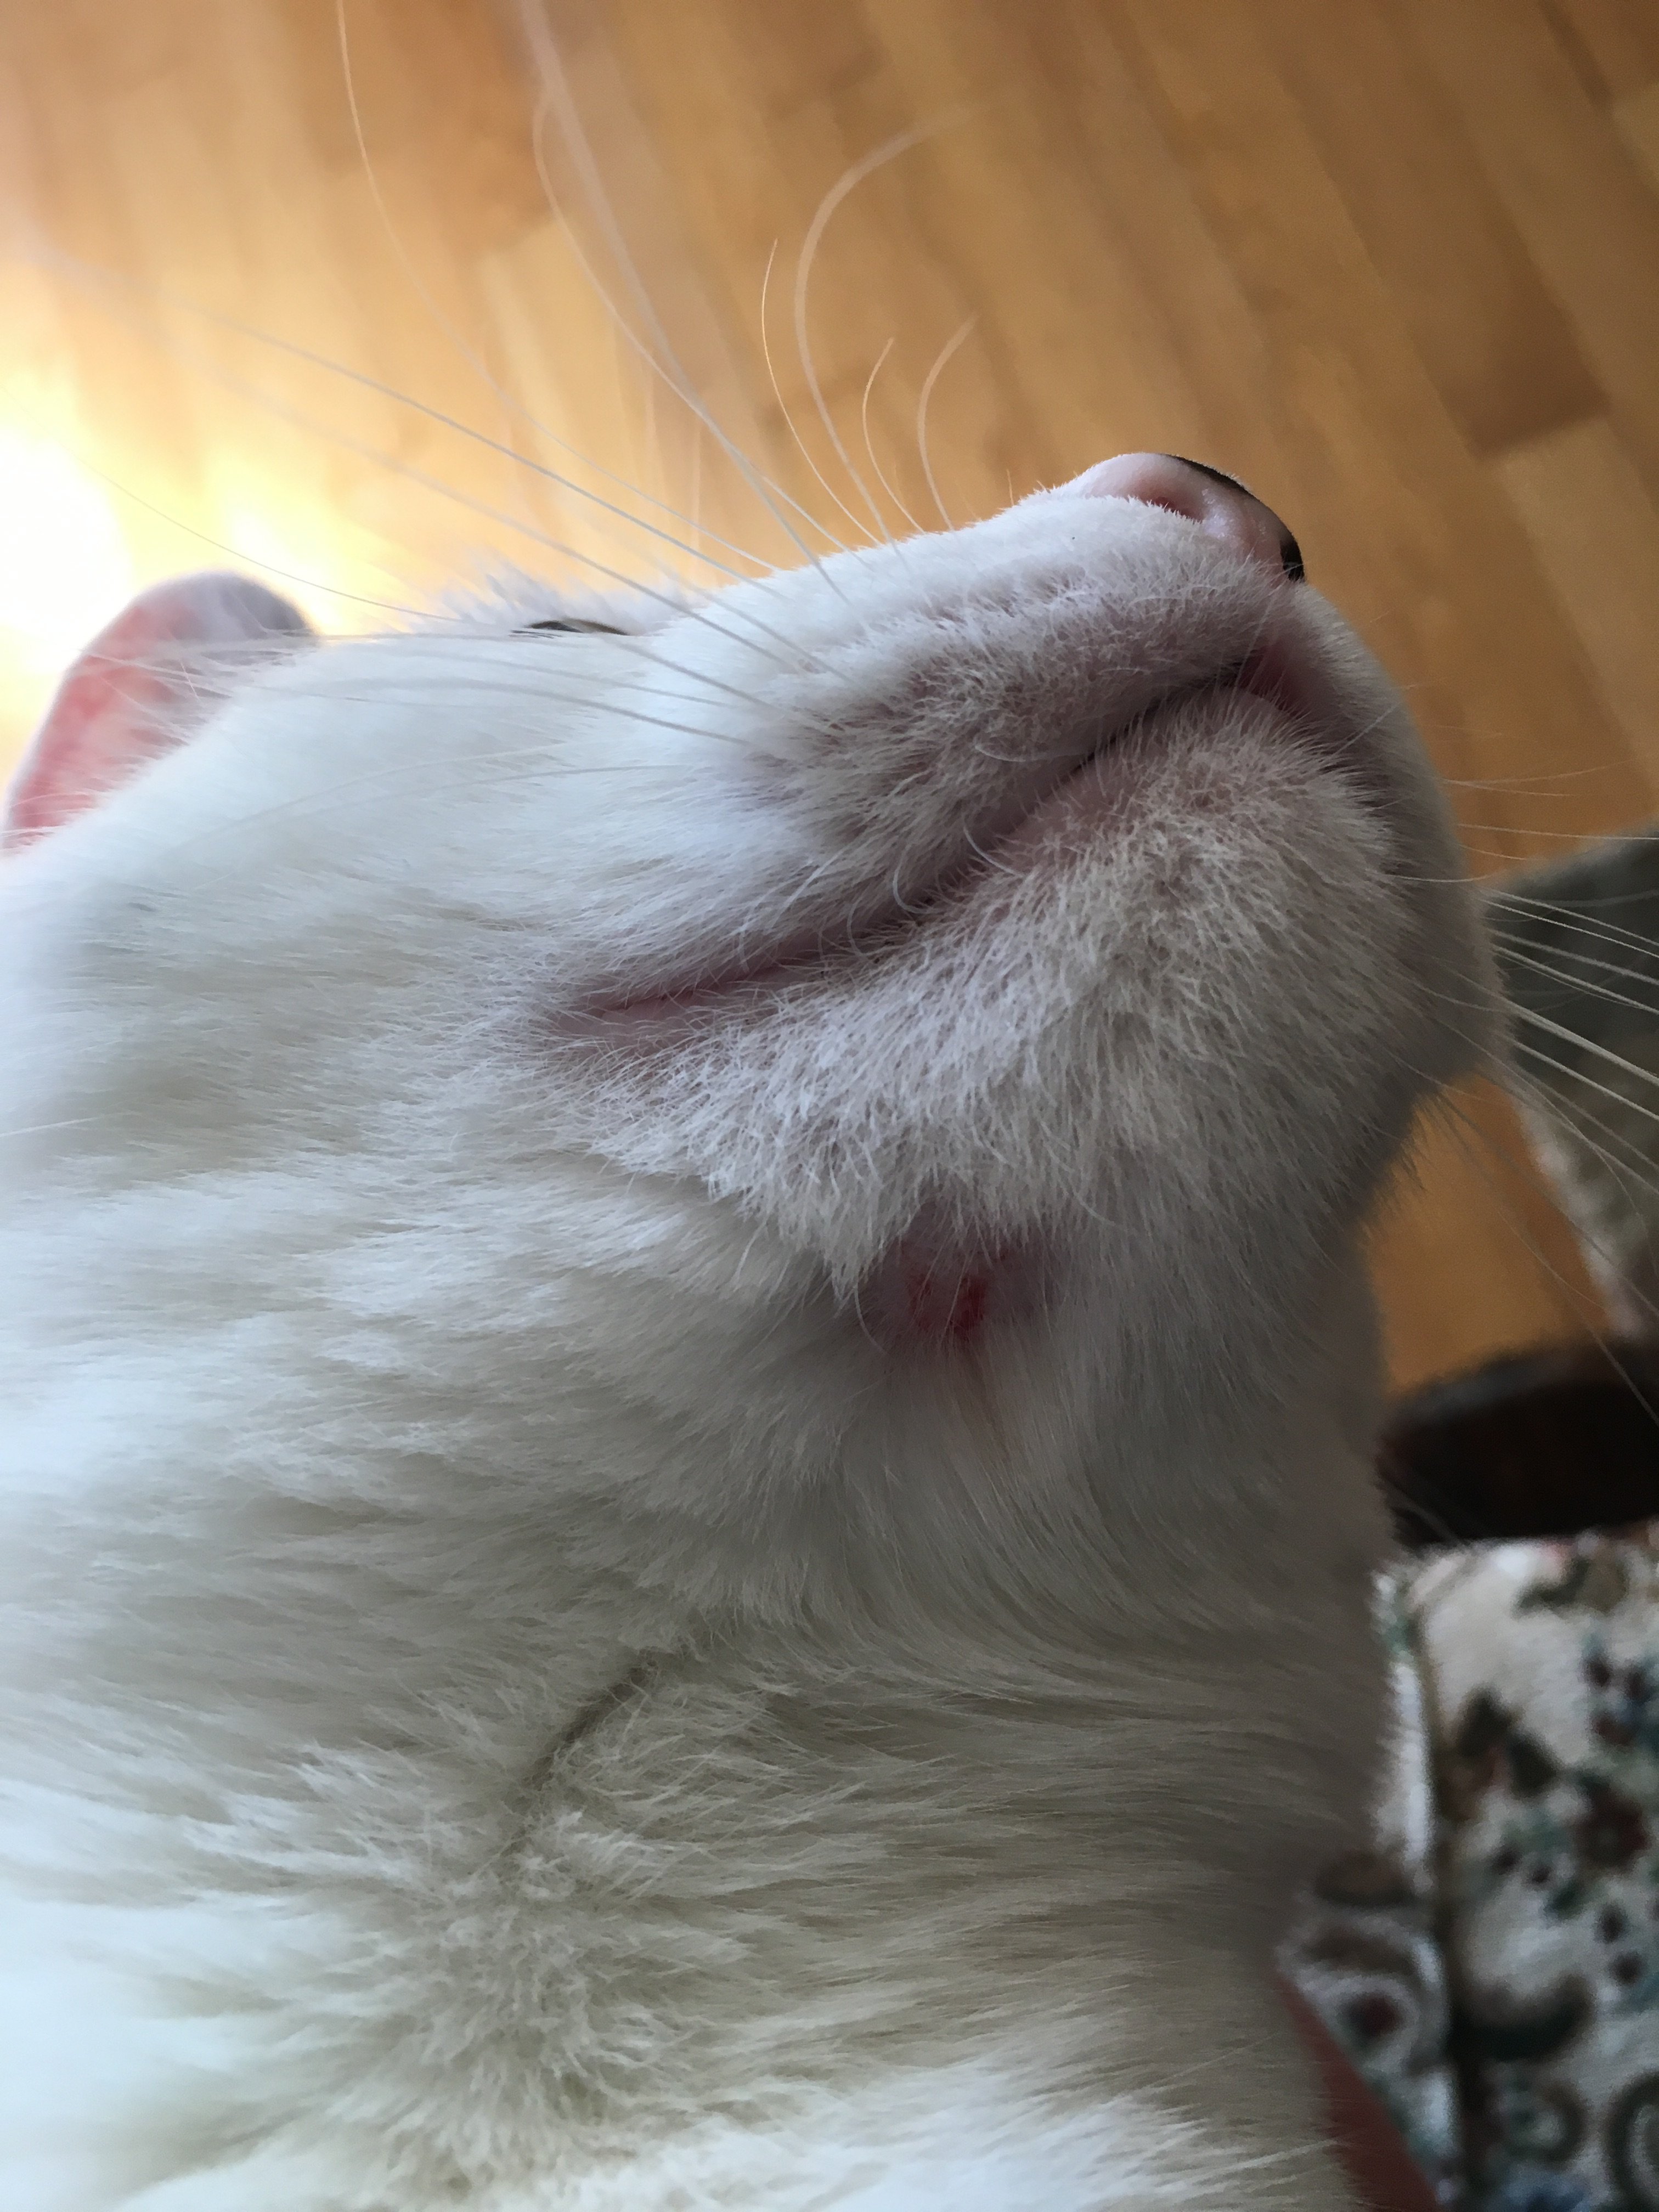 Blood And Missing Fur On Cats Chin Thecatsite